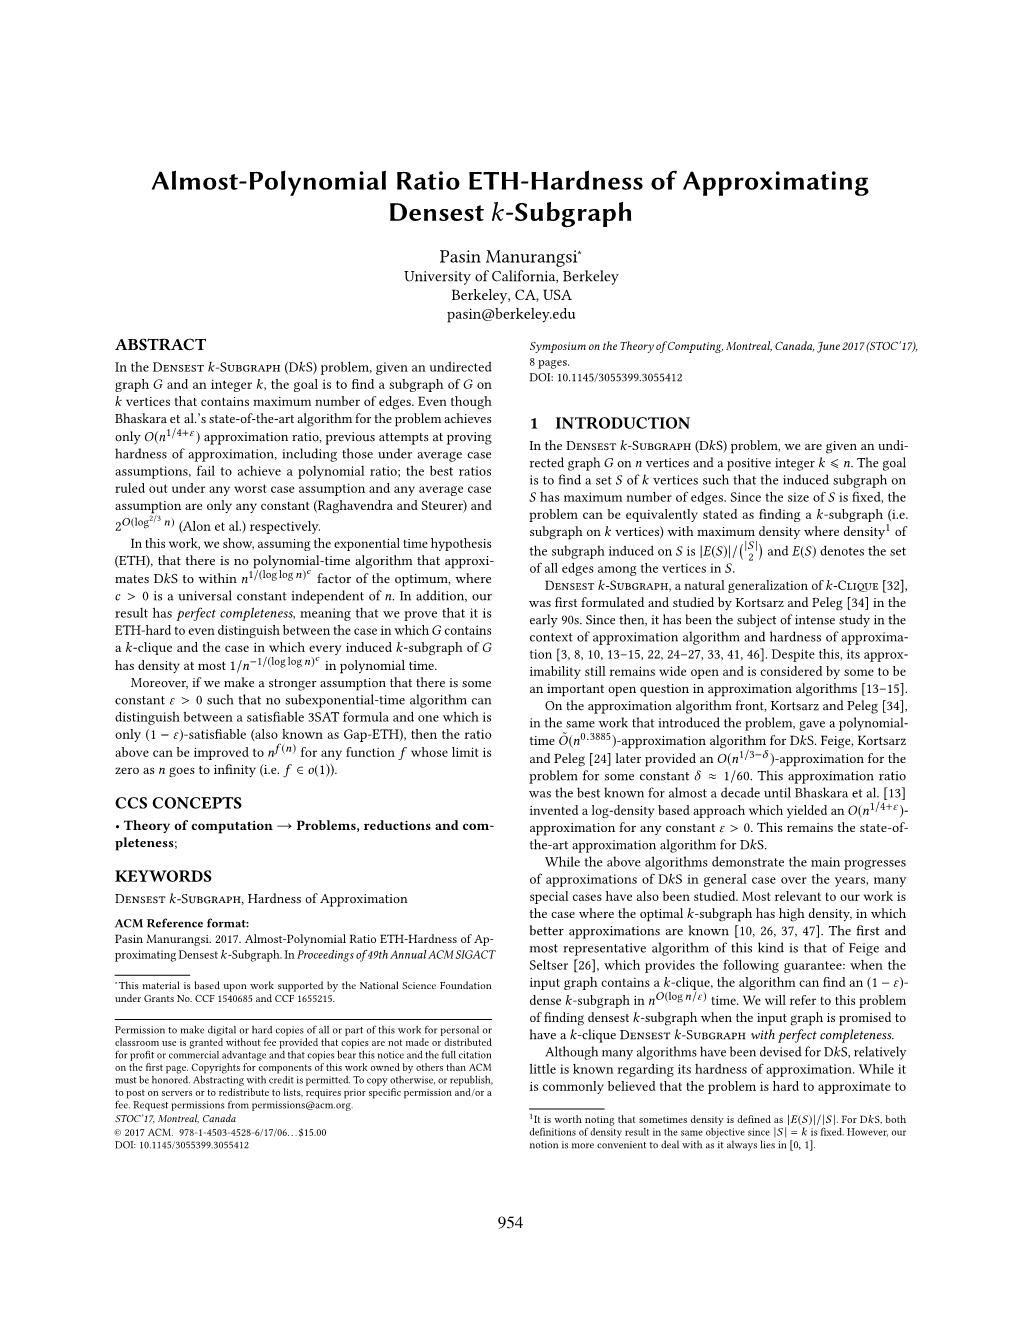 Almost-Polynomial Ratio ETH-Hardness of Approximating Densest K-Subgraph